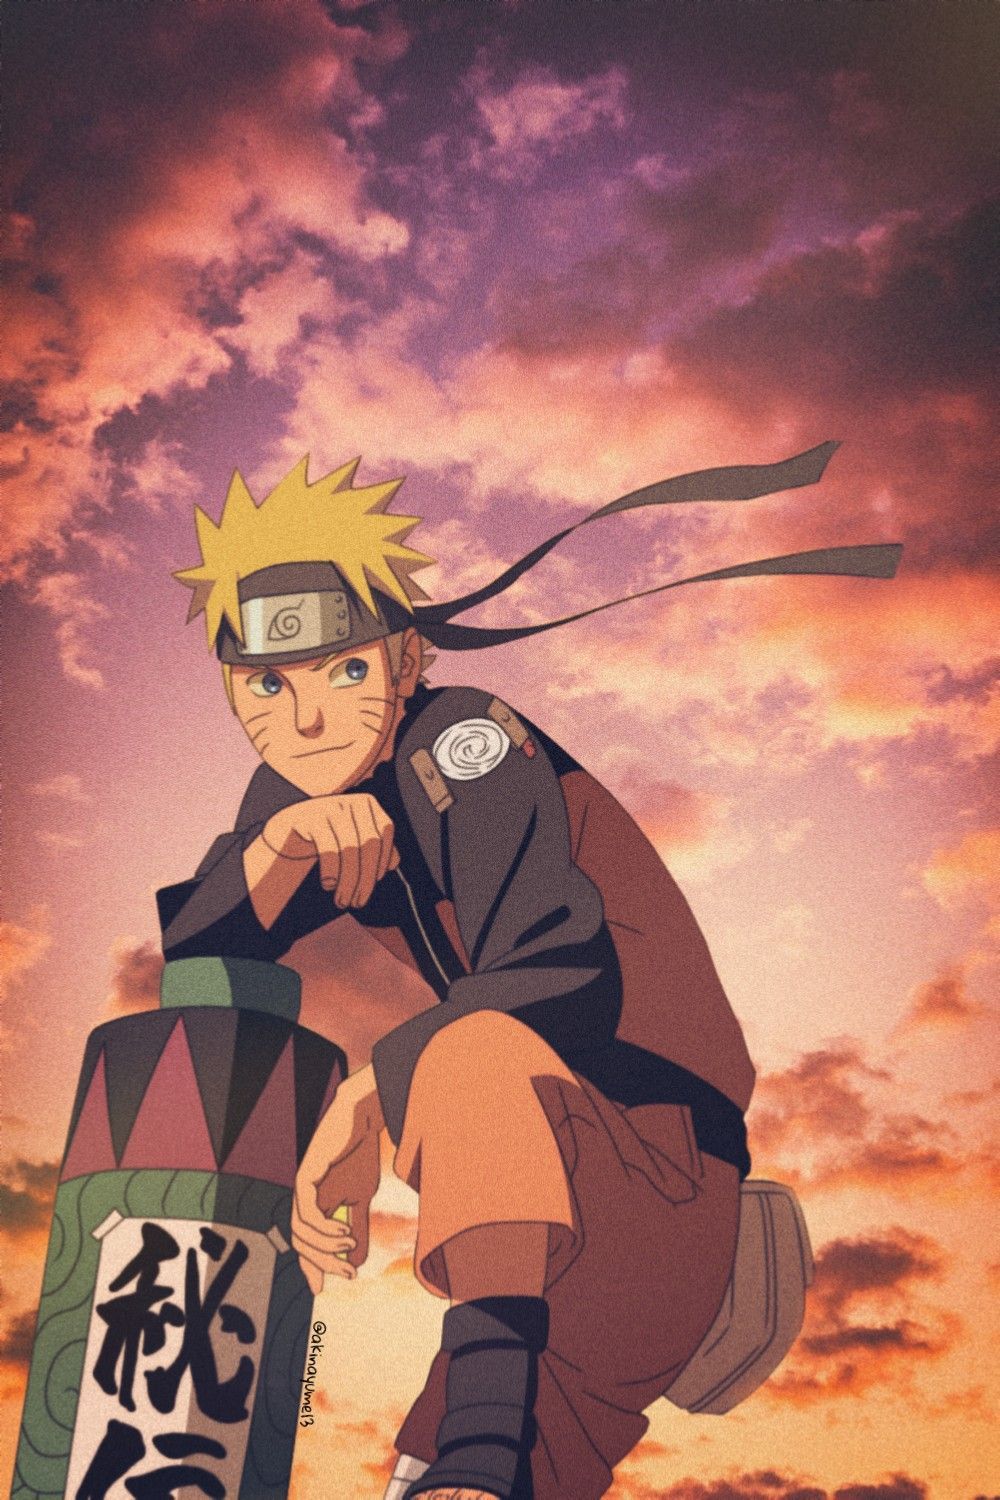 Iphone X Anime Naruto Wallpapers - Wallpaper Cave